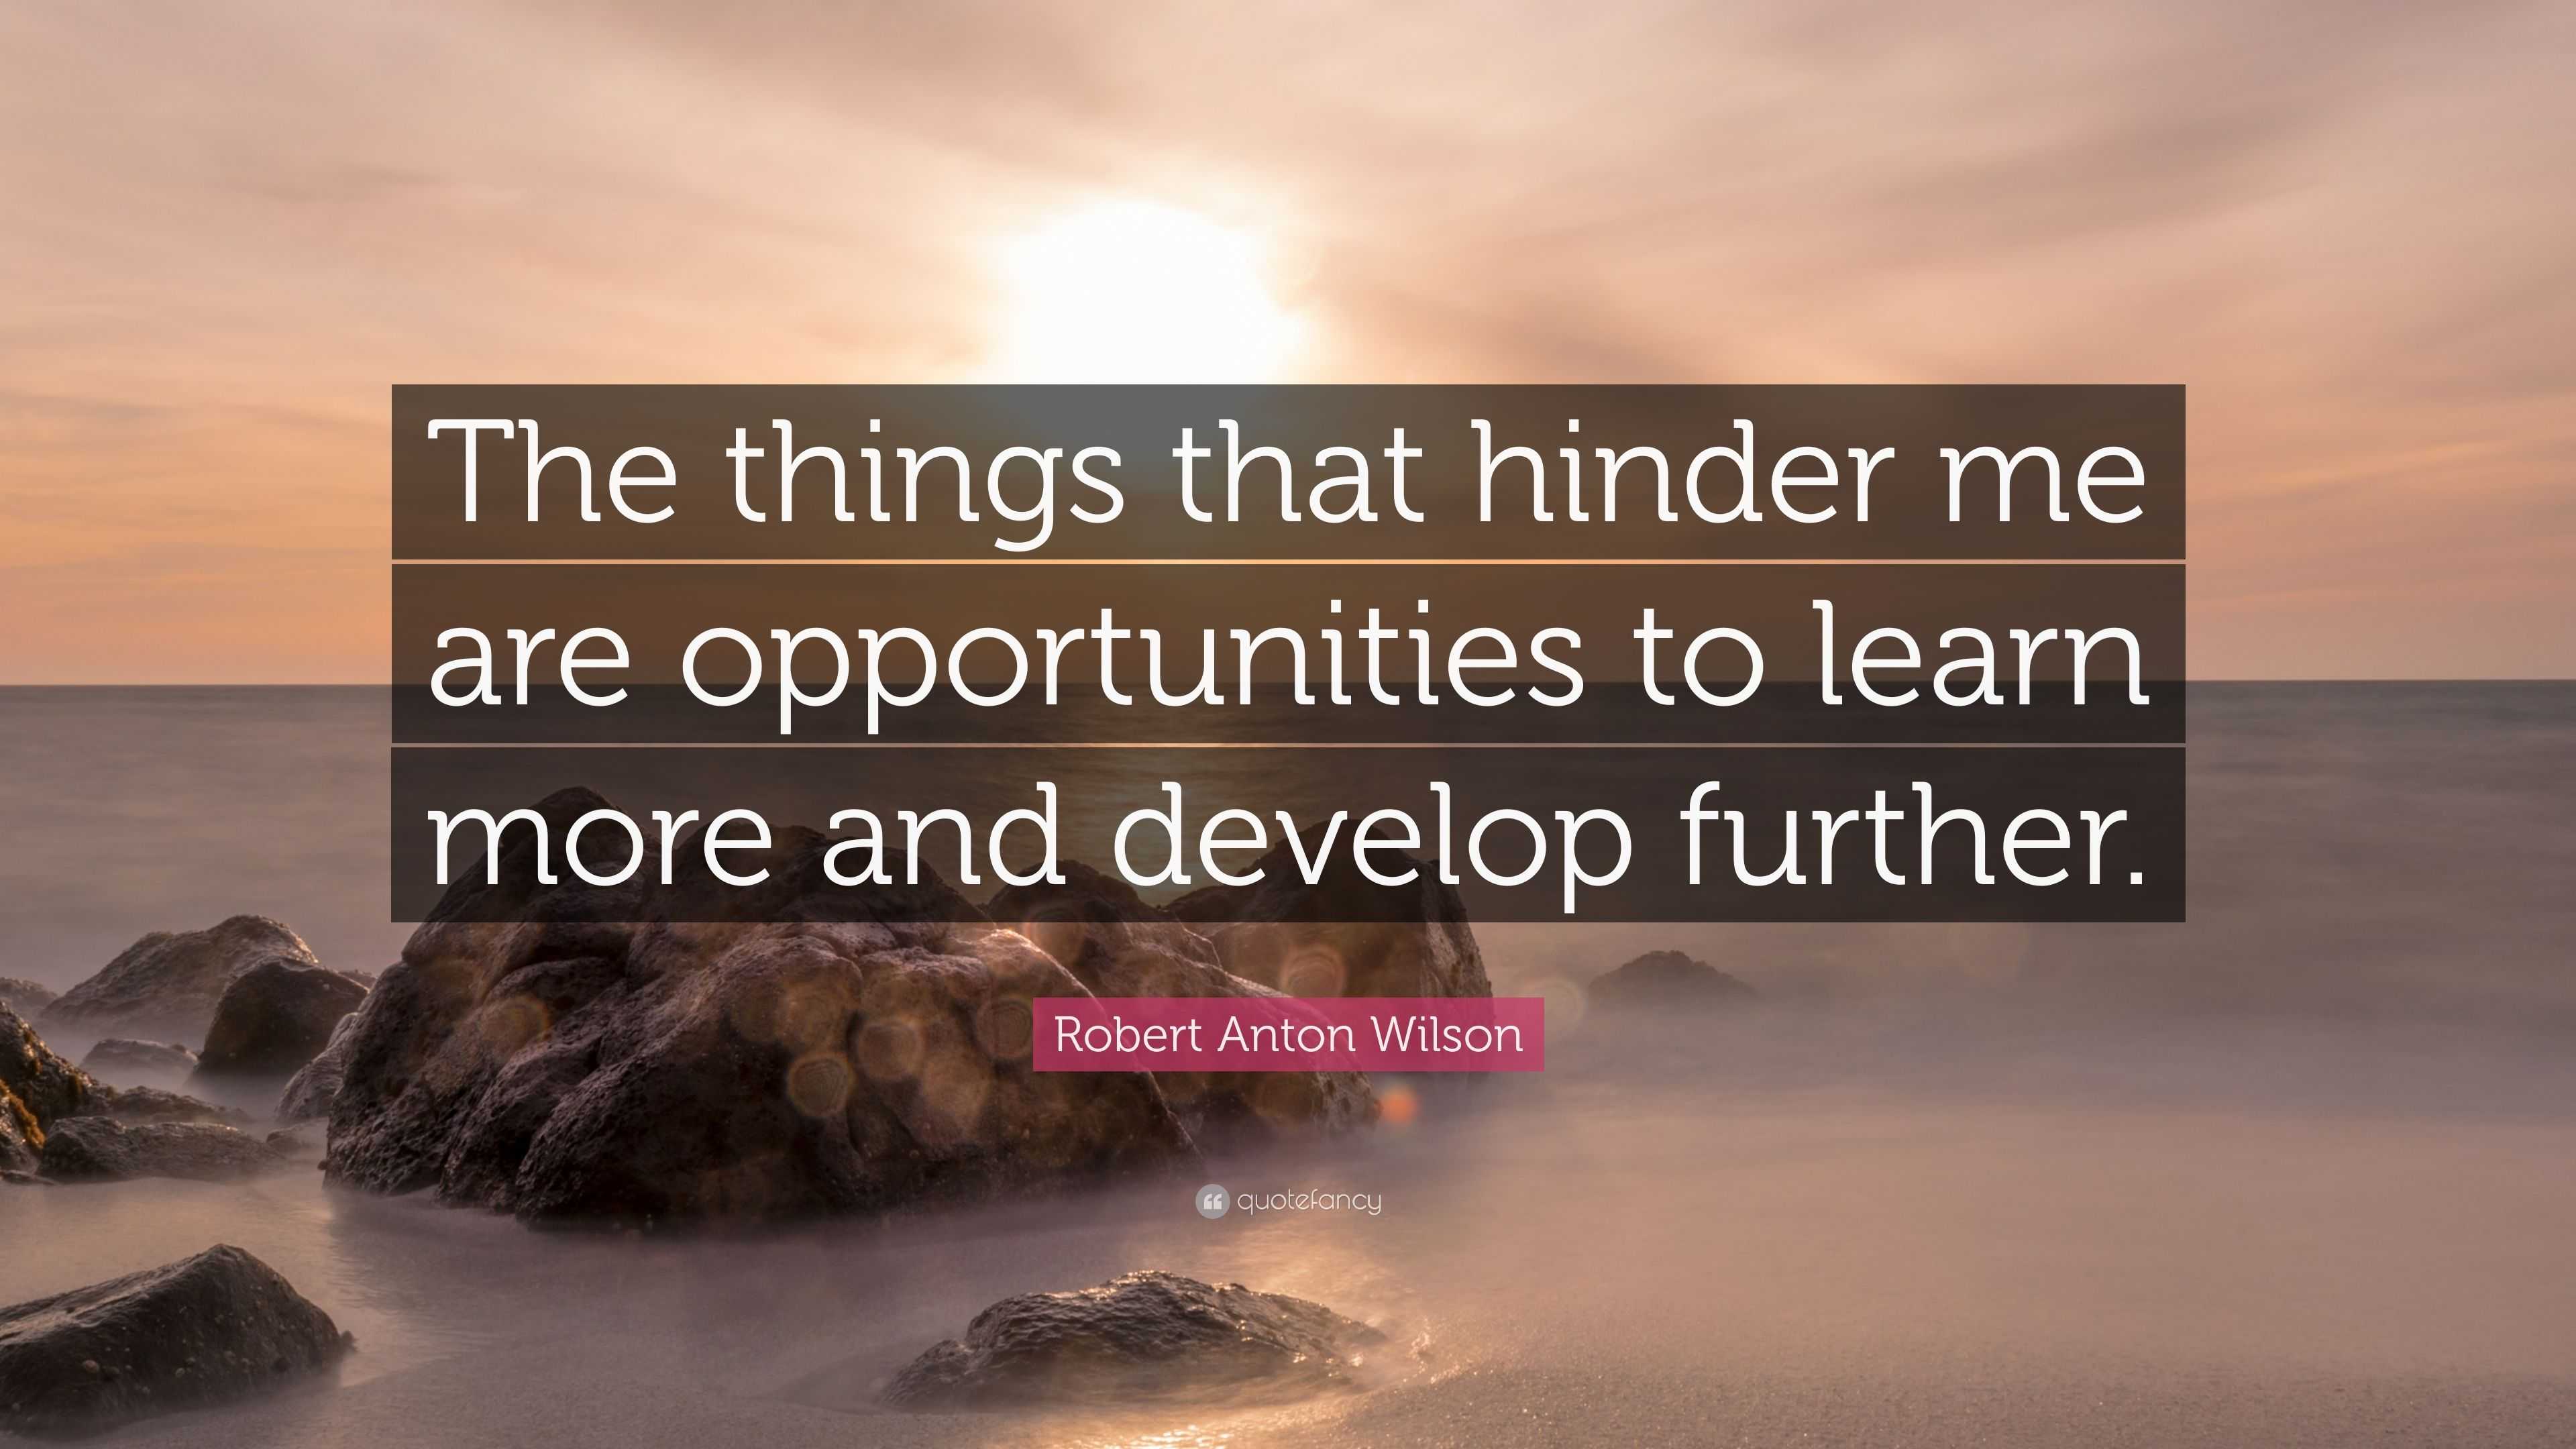 Robert Anton Wilson Quote: “The things that hinder me are opportunities ...